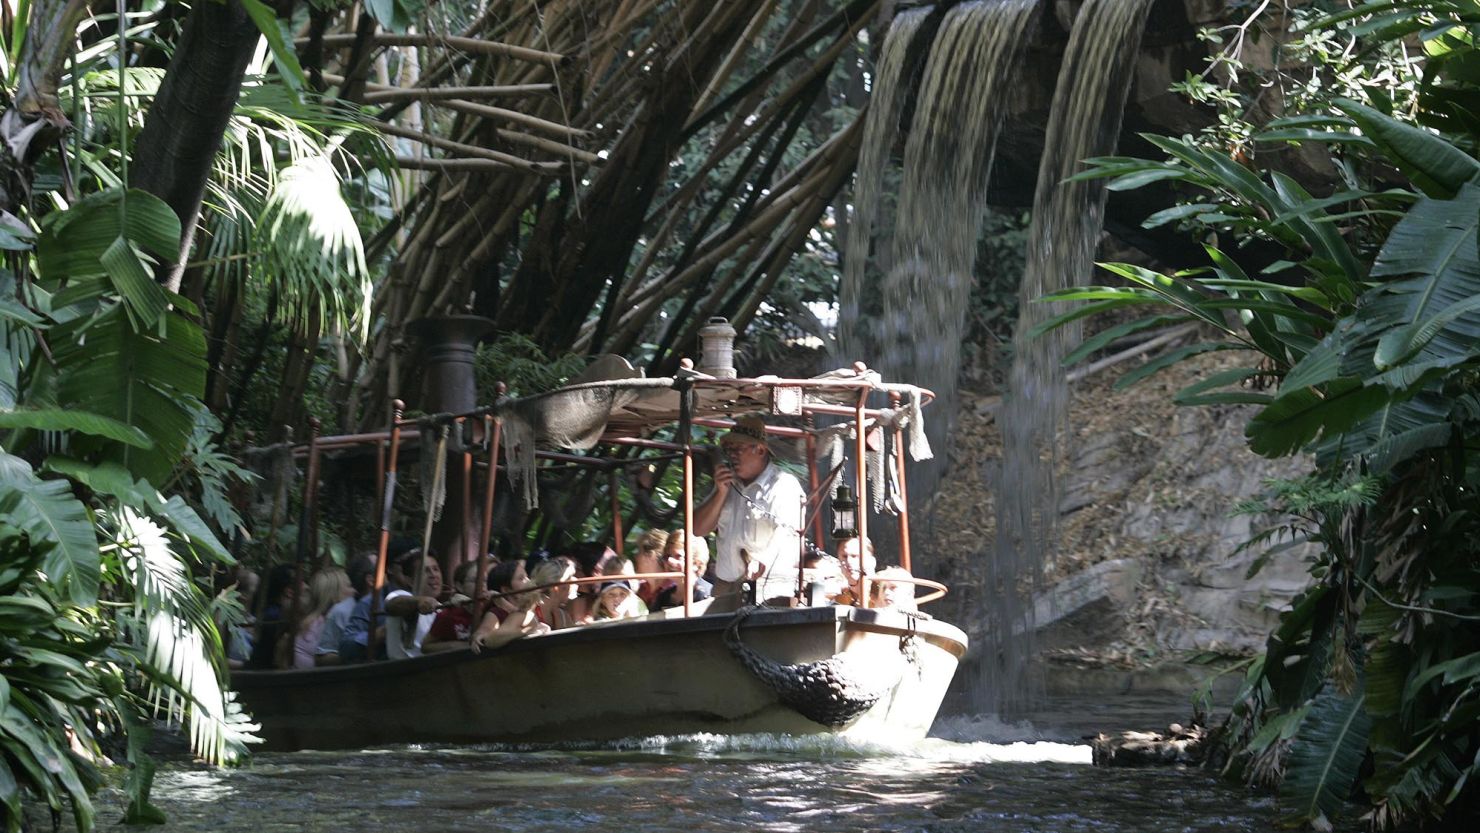 The guns are back on the Jungle Cruise. And the famous teacups are spinning again. In what seems to be a rolereversing position on political correctness, park officials say they are returning the magic to Disneyland, which next year celebrates its 50th birthday. No word yet whether the wenches in Pirates of the Caribbean will be back.  (Photo by Don Kelsen/Los Angeles Times via Getty Images)